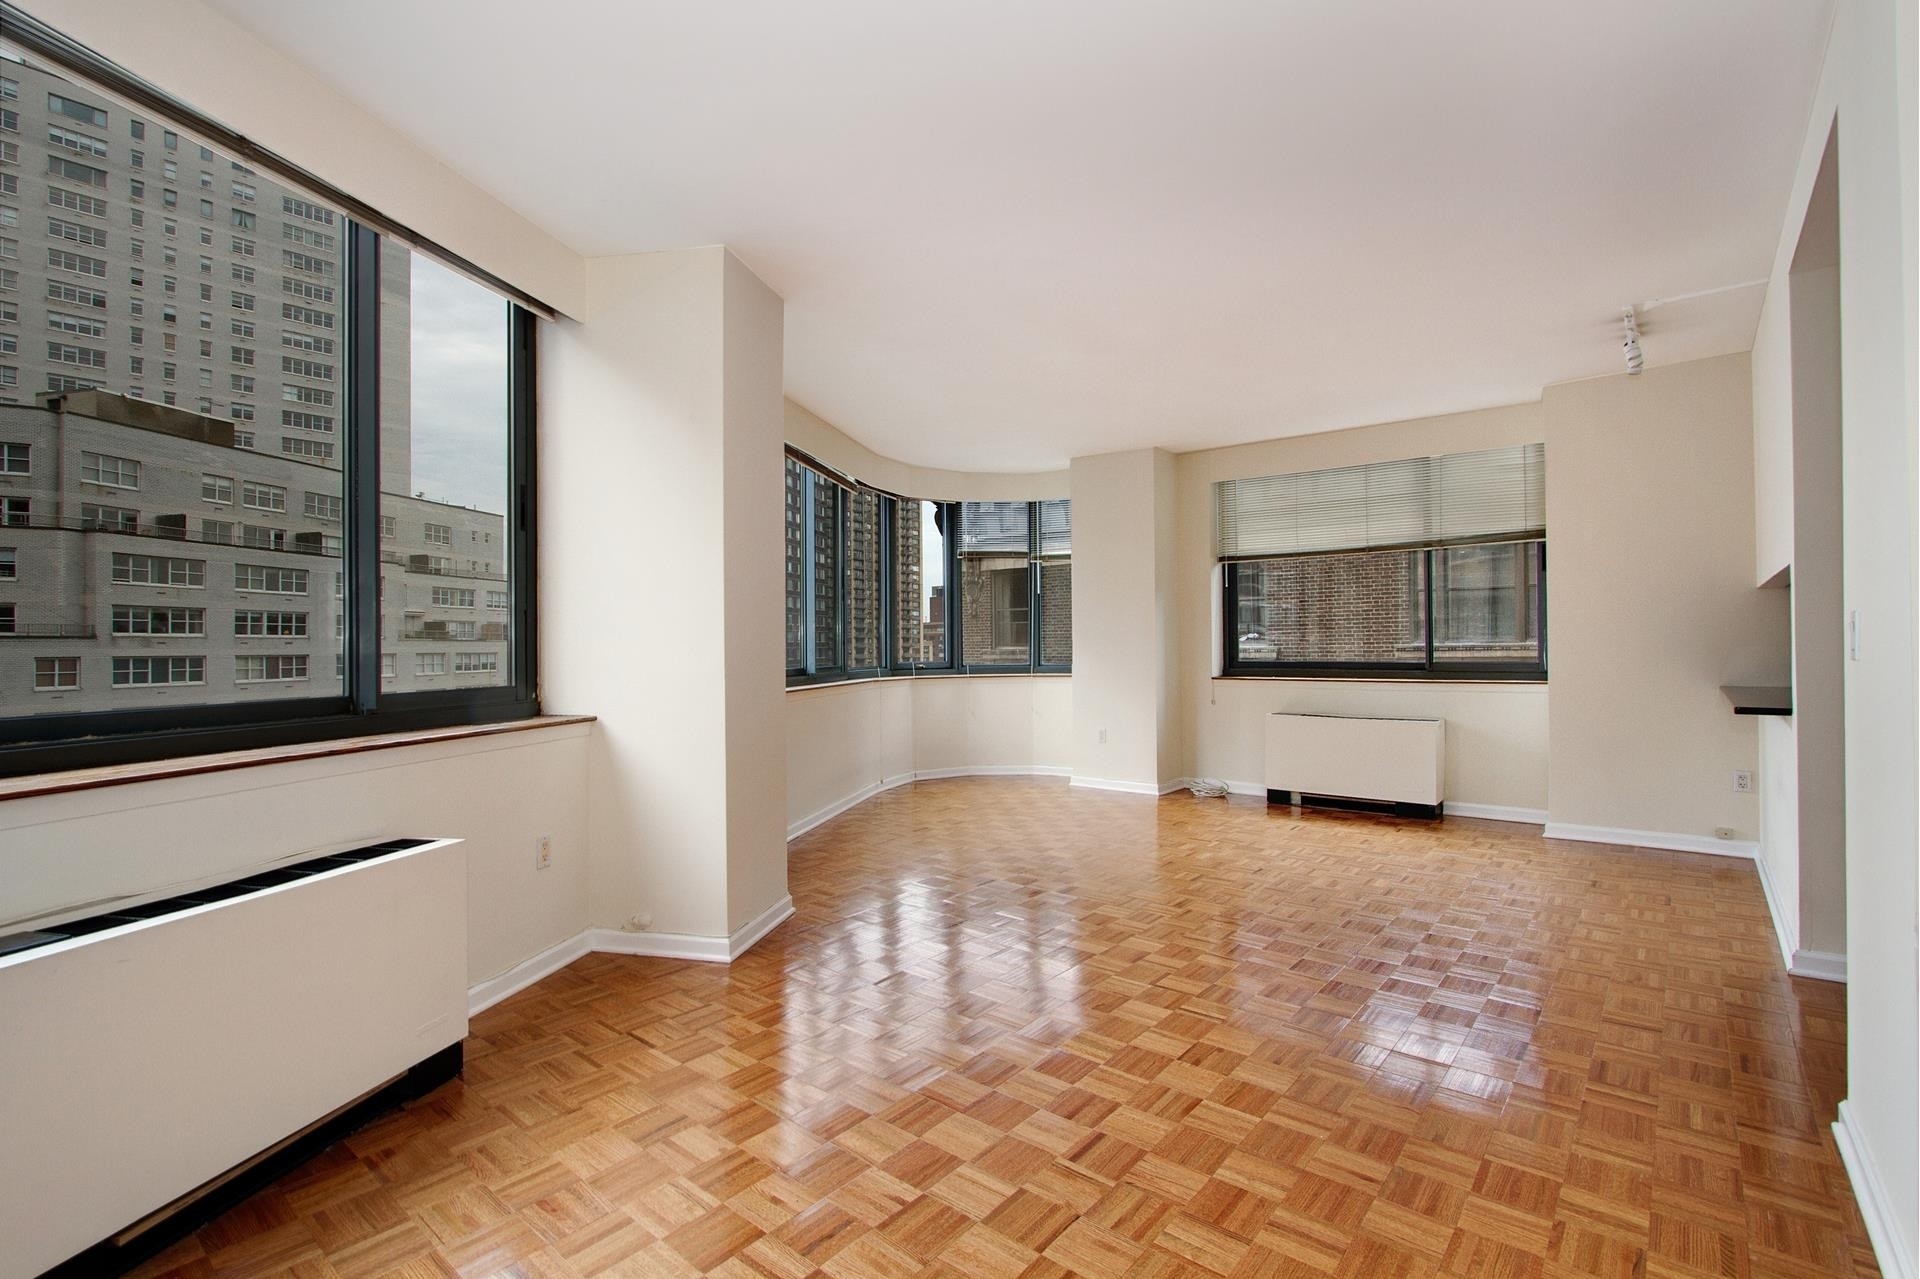 2. Condominiums for Sale at The Copley, 2000 BROADWAY, 15G Lincoln Square, New York, NY 10023